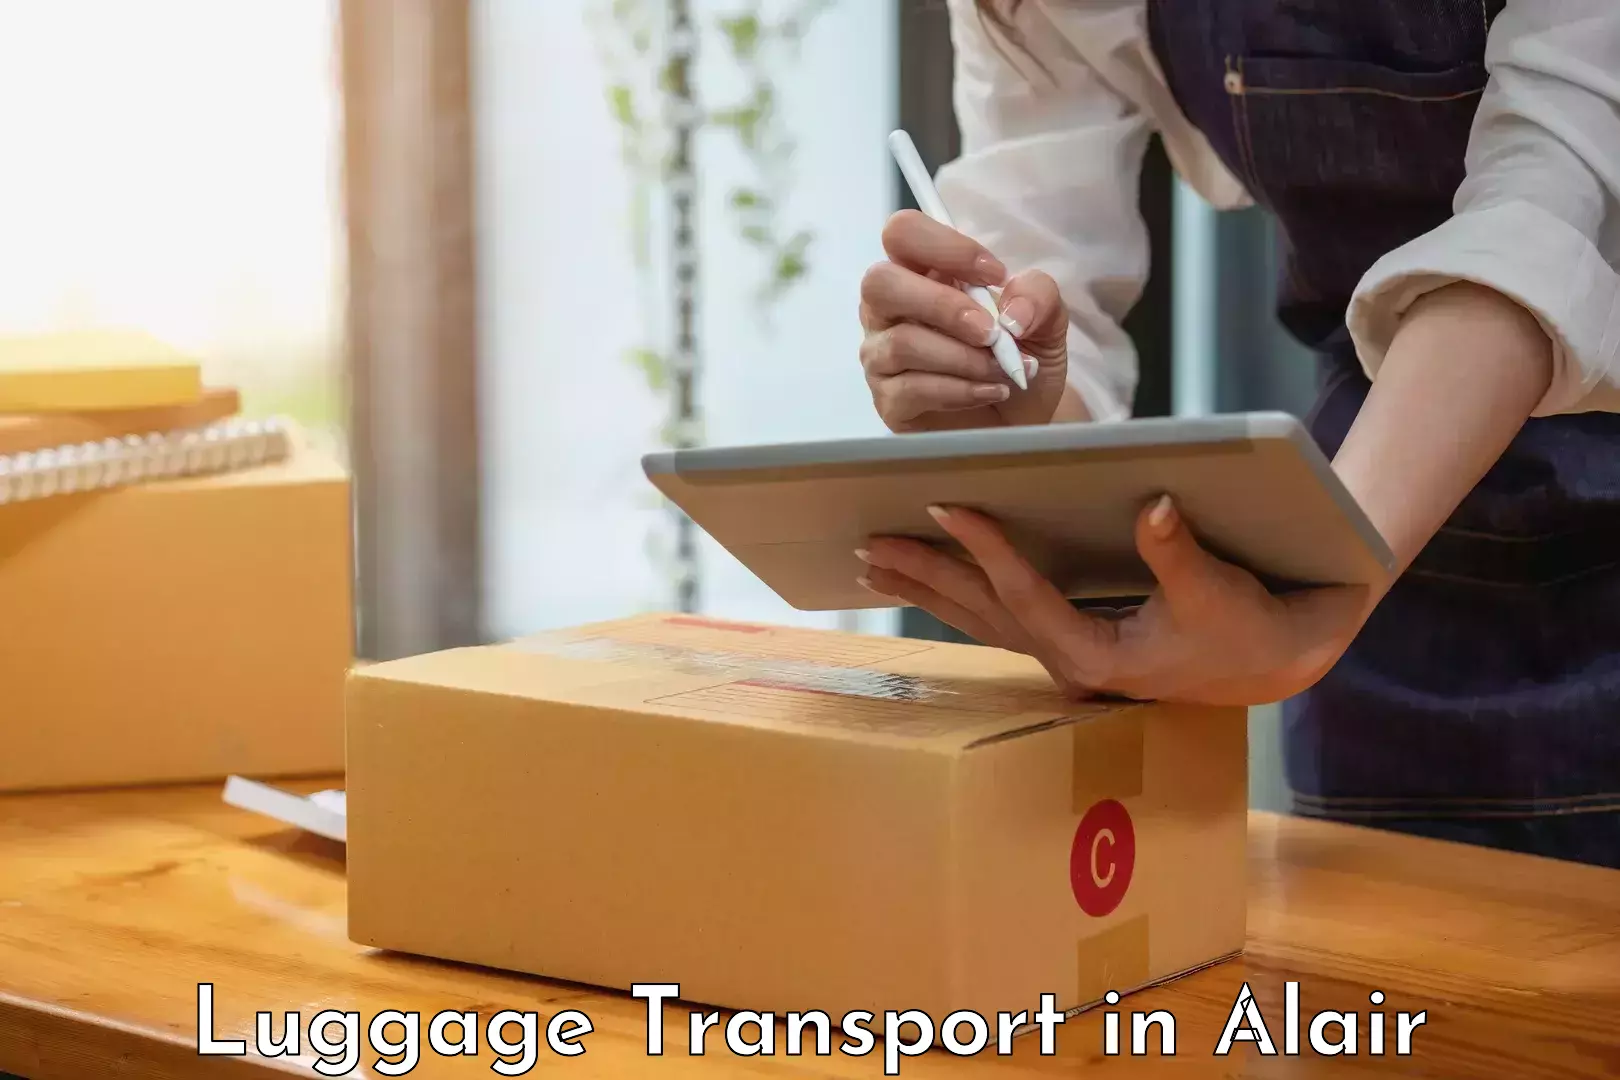 Luggage transport operations in Alair